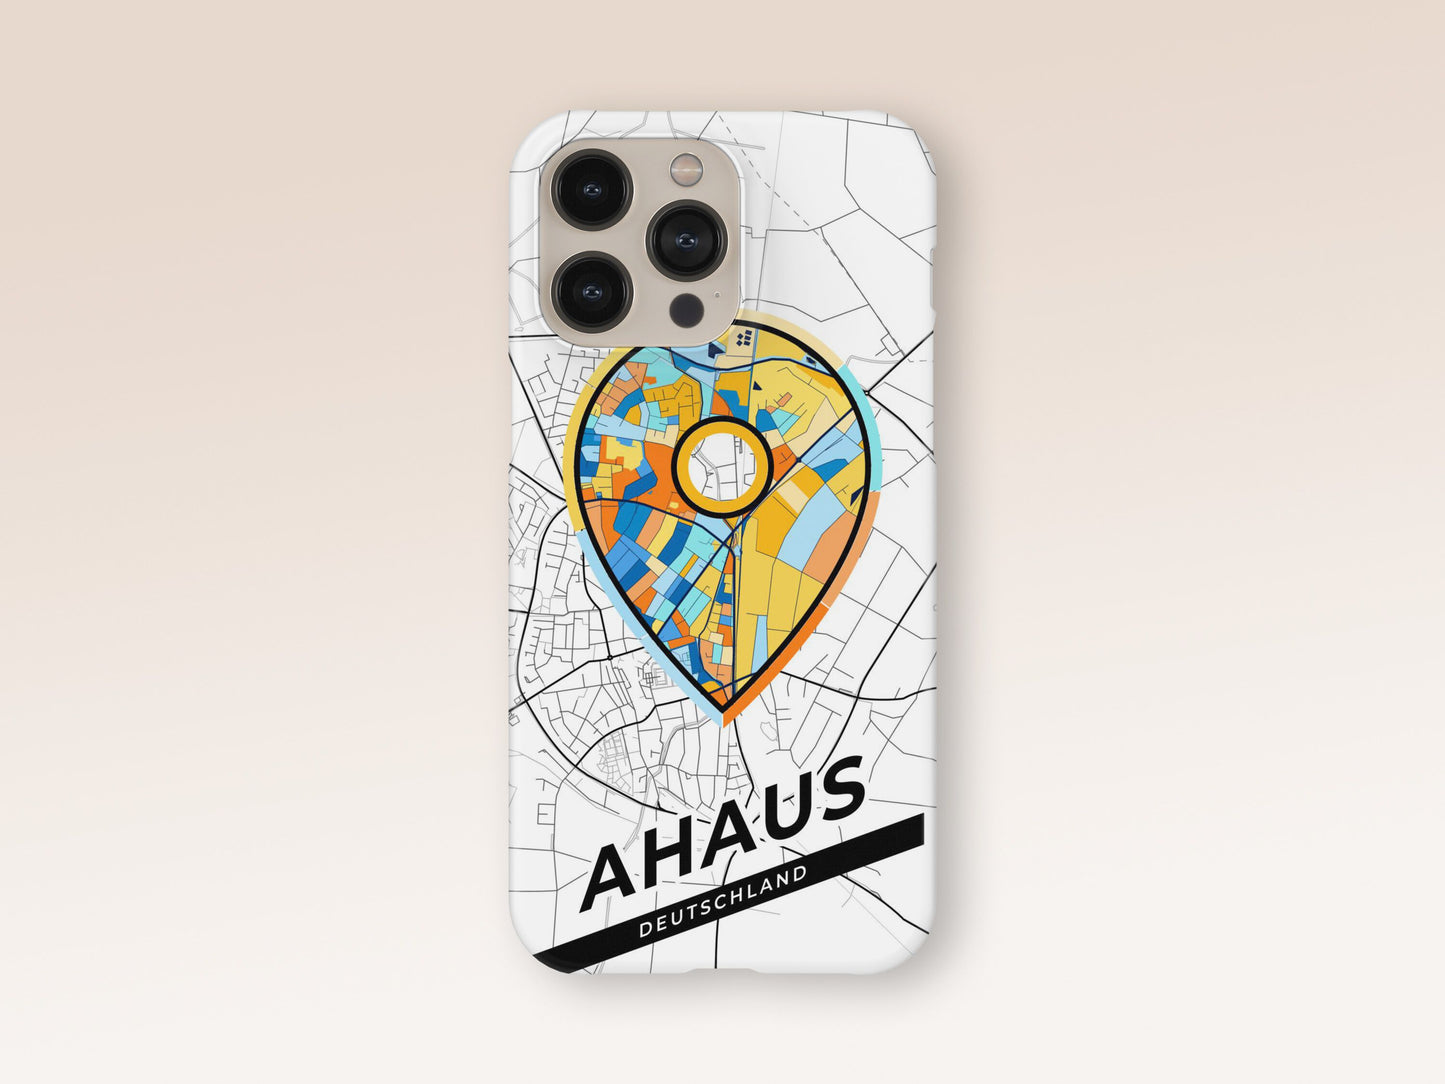 Ahaus Deutschland slim phone case with colorful icon. Birthday, wedding or housewarming gift. Couple match cases. 1